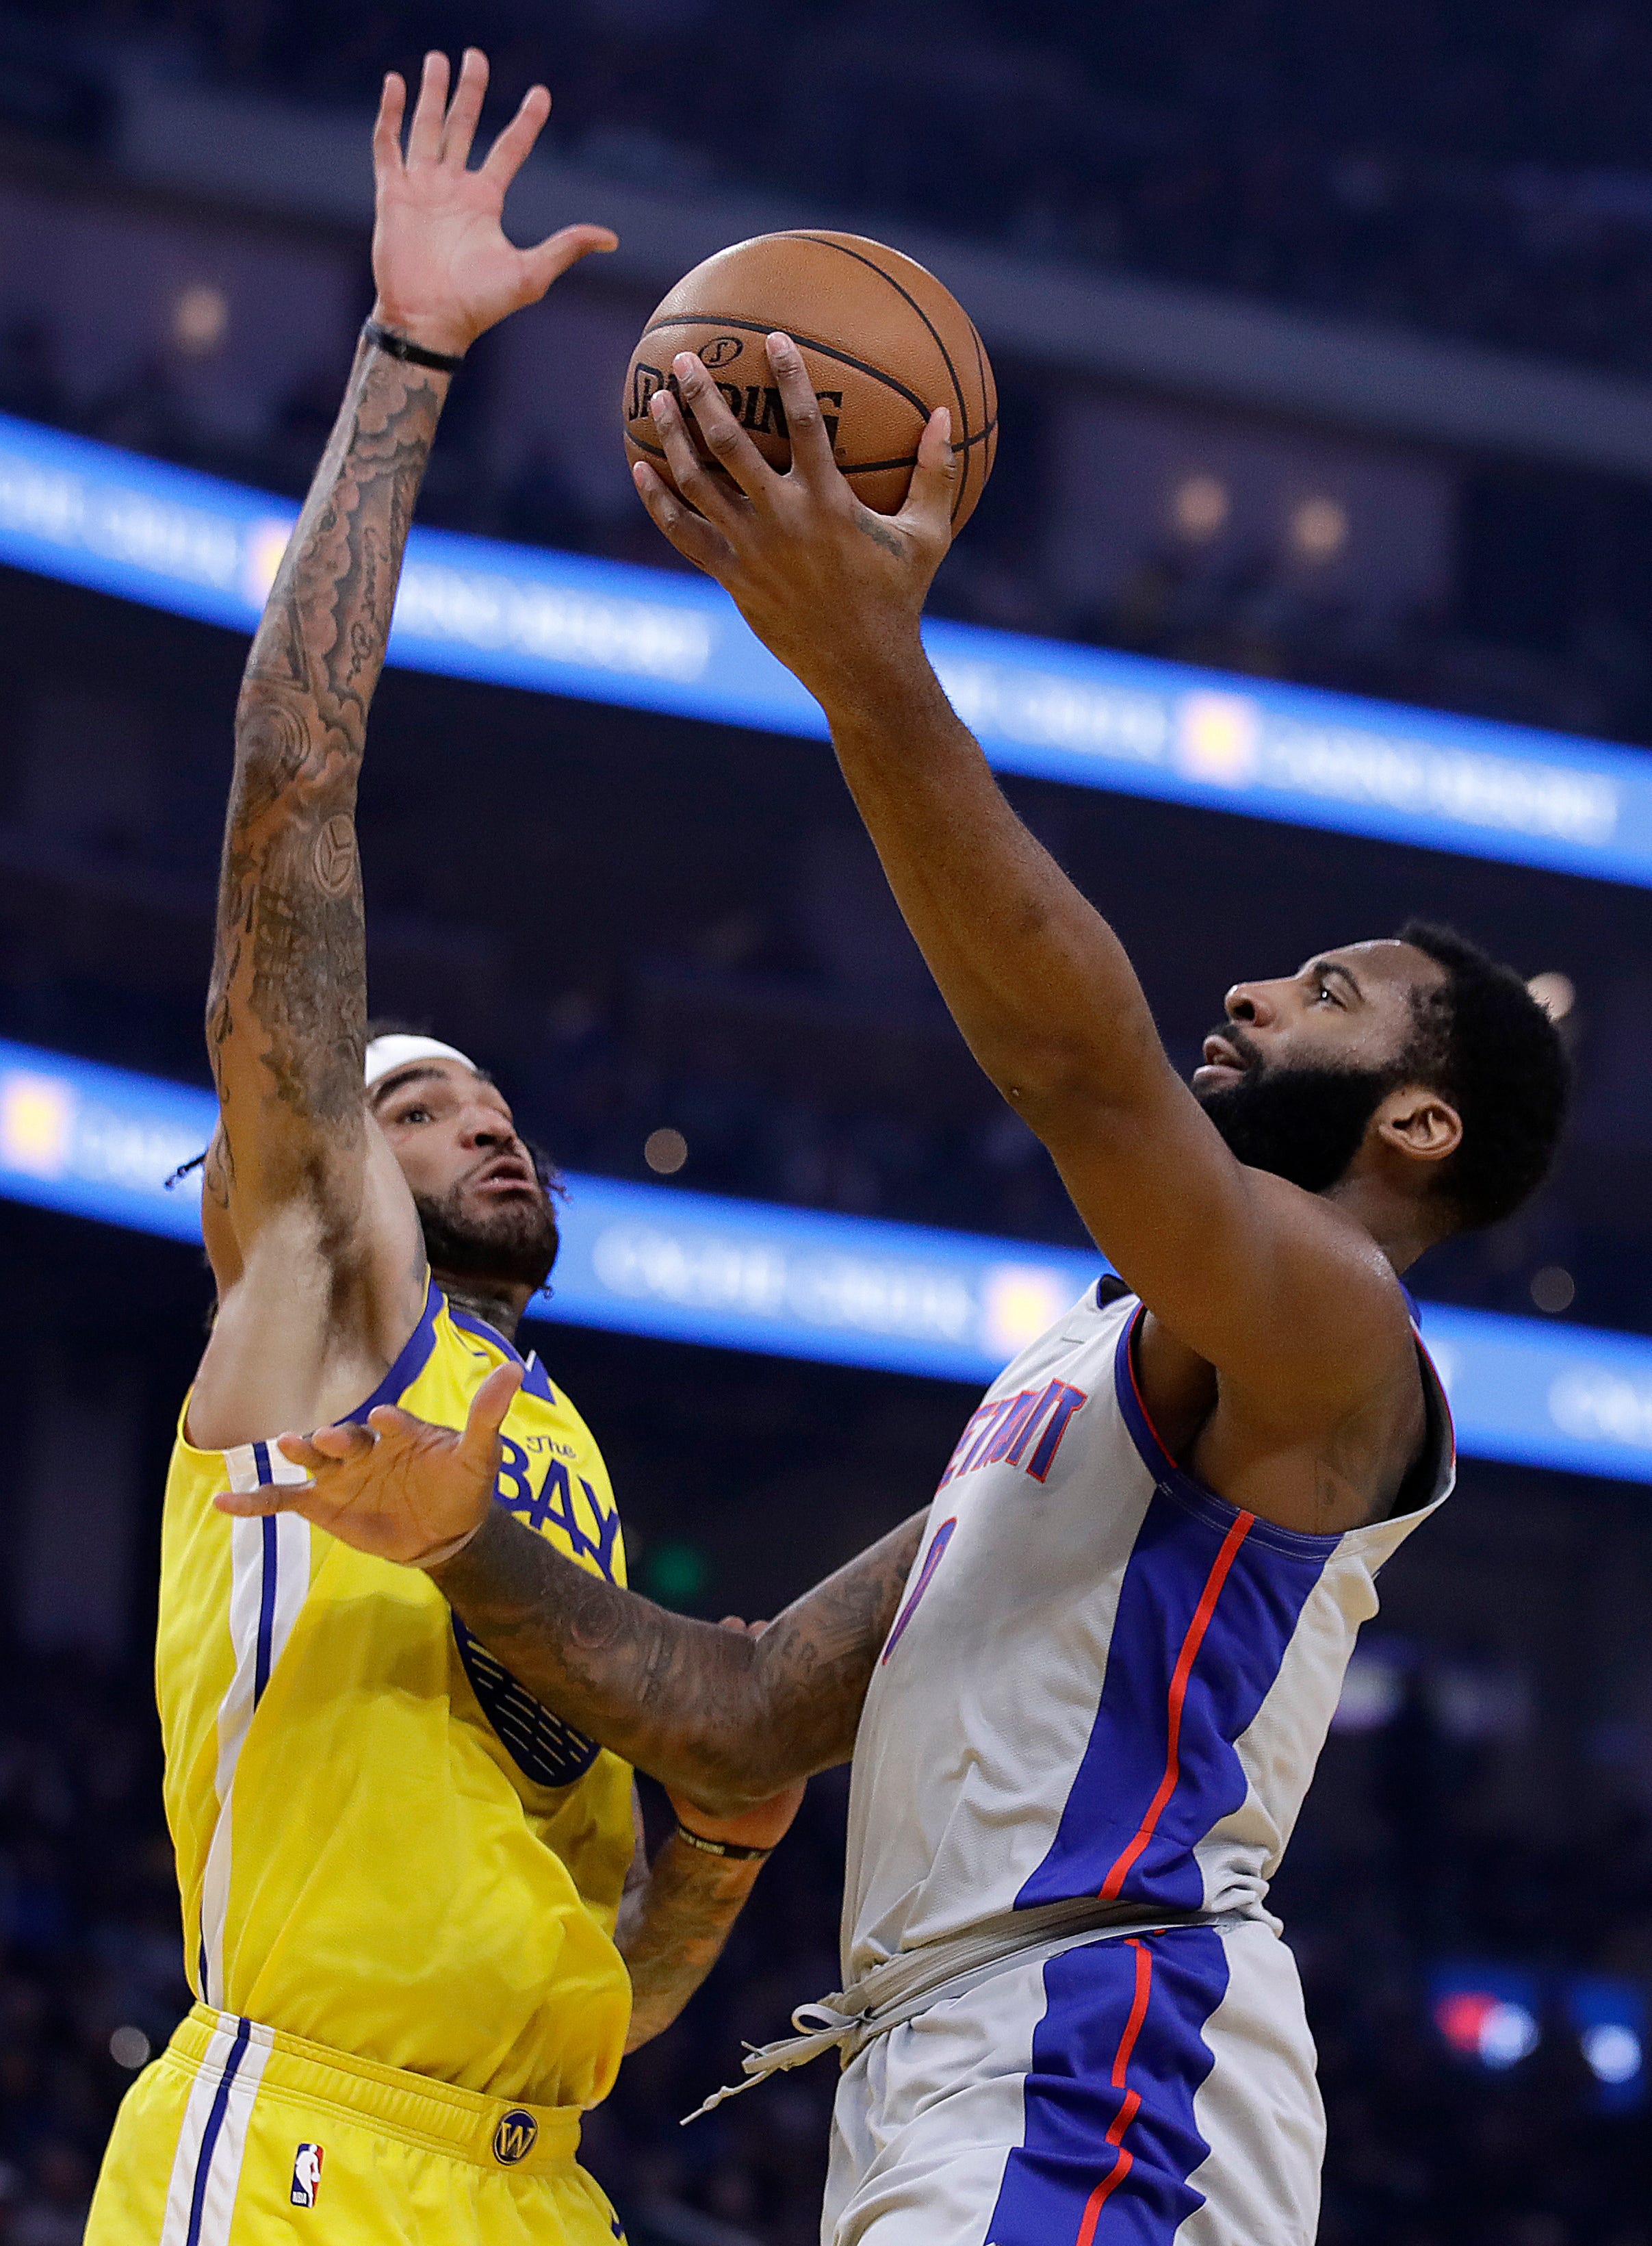 Detroit Pistons' Andre Drummond, right, lays up a shot against Golden State Warriors' Willie Cauley-Stein during the first half.